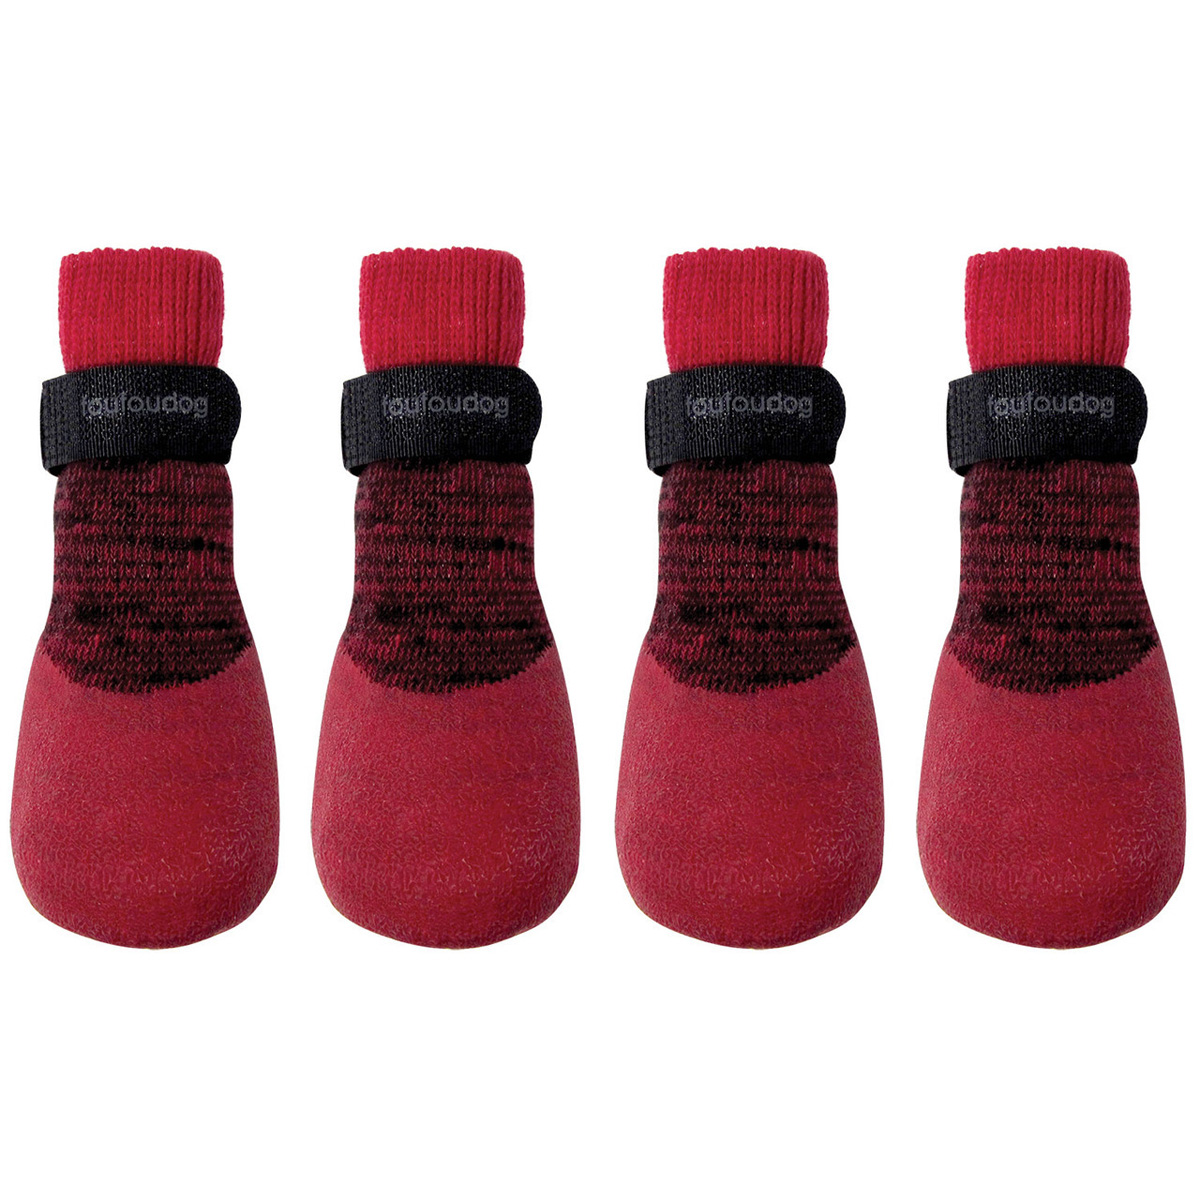 foufou Dog Rubber Dipped Dog Socks - Red